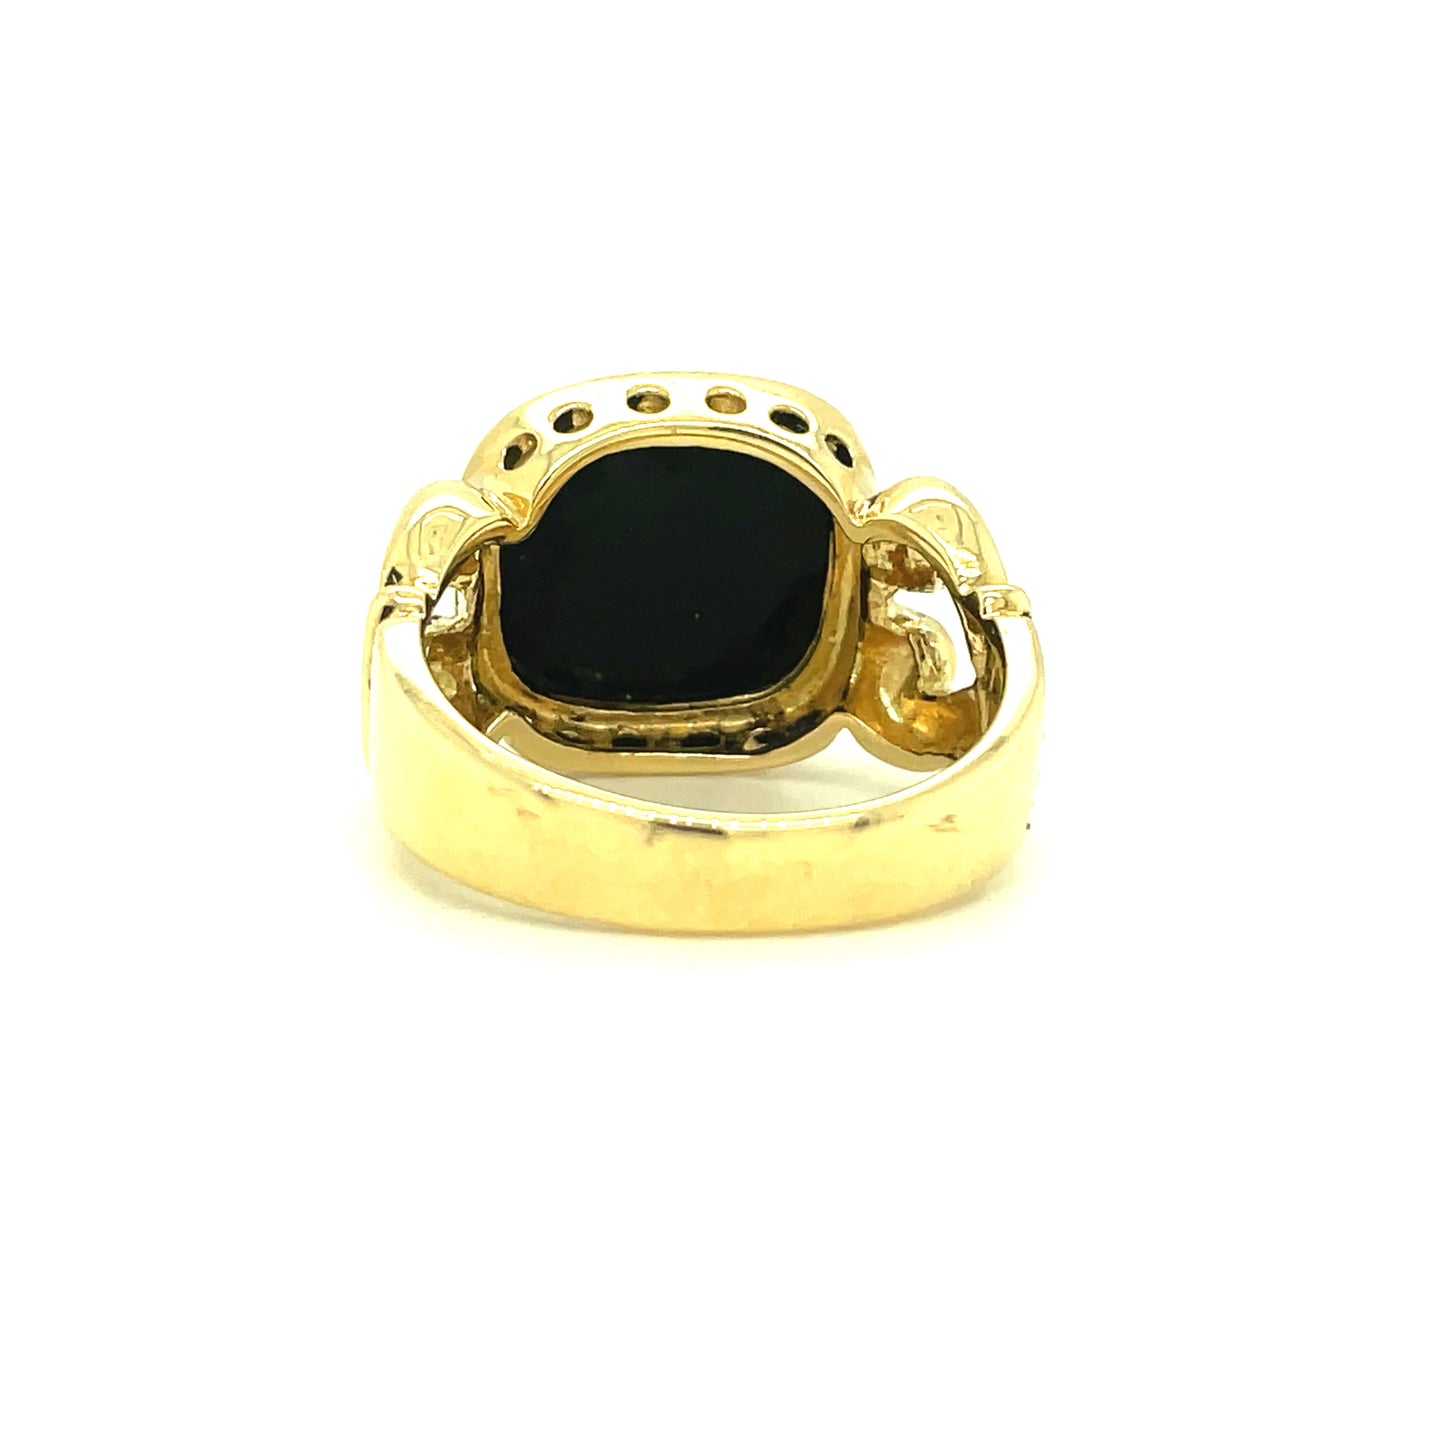 Vintage 14k Yellow Gold and Onyx Ring Size 7